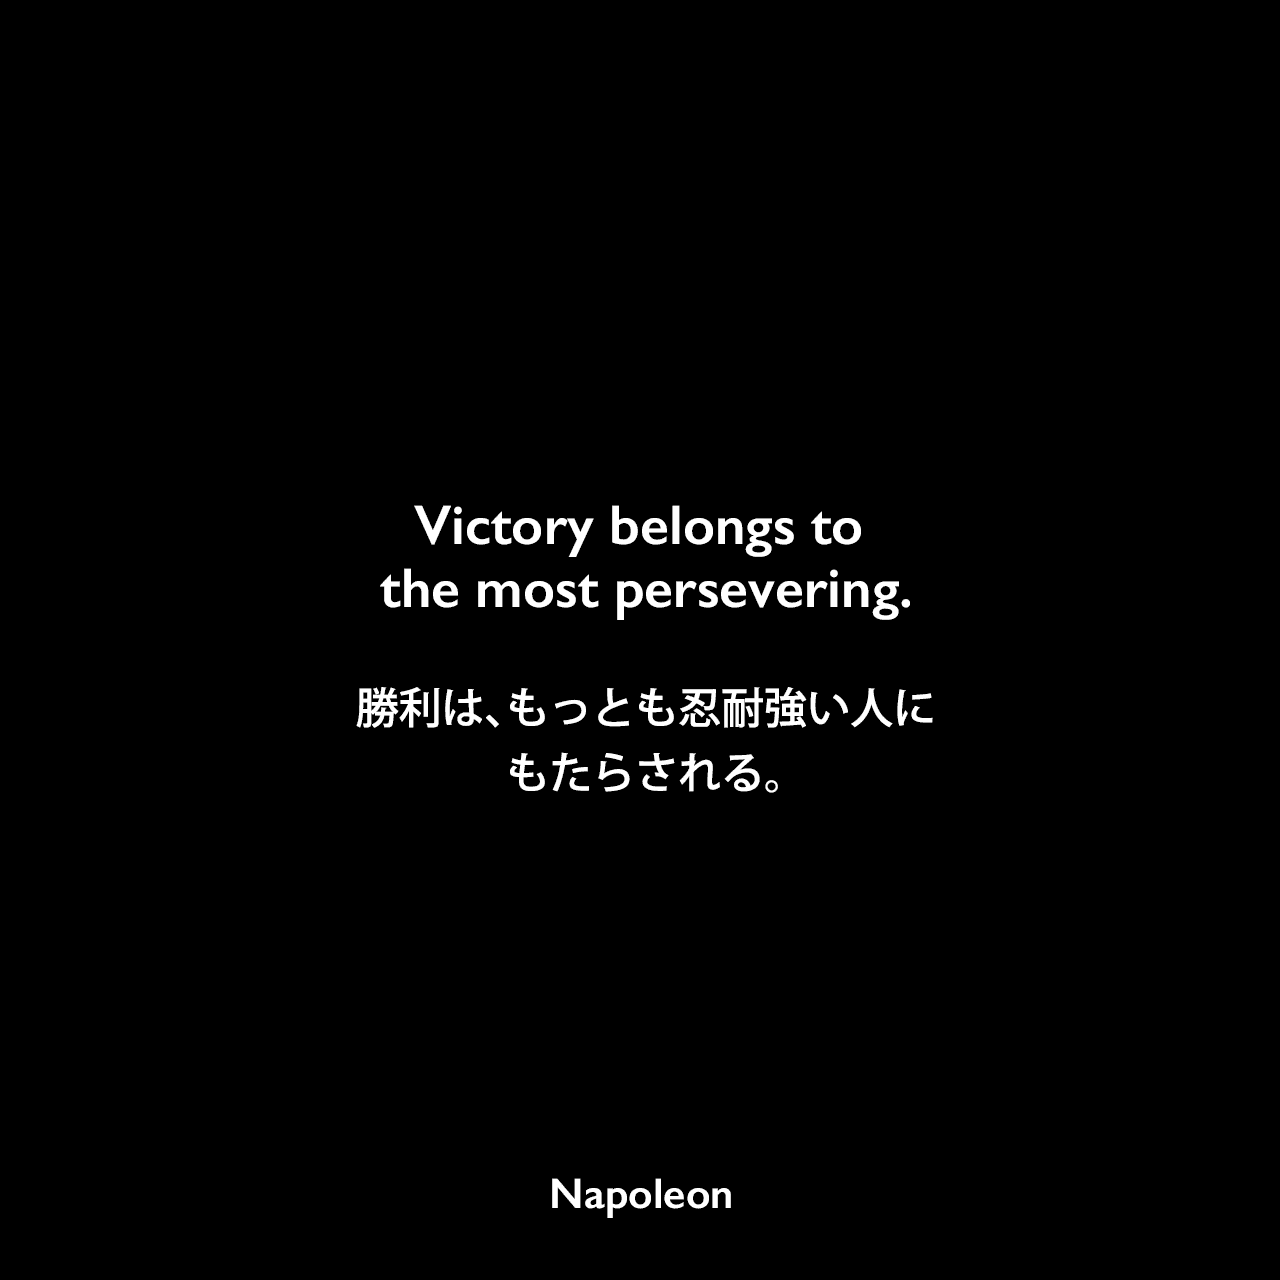 Victory belongs to the most persevering.勝利は、もっとも忍耐強い人にもたらされる。Napoleon